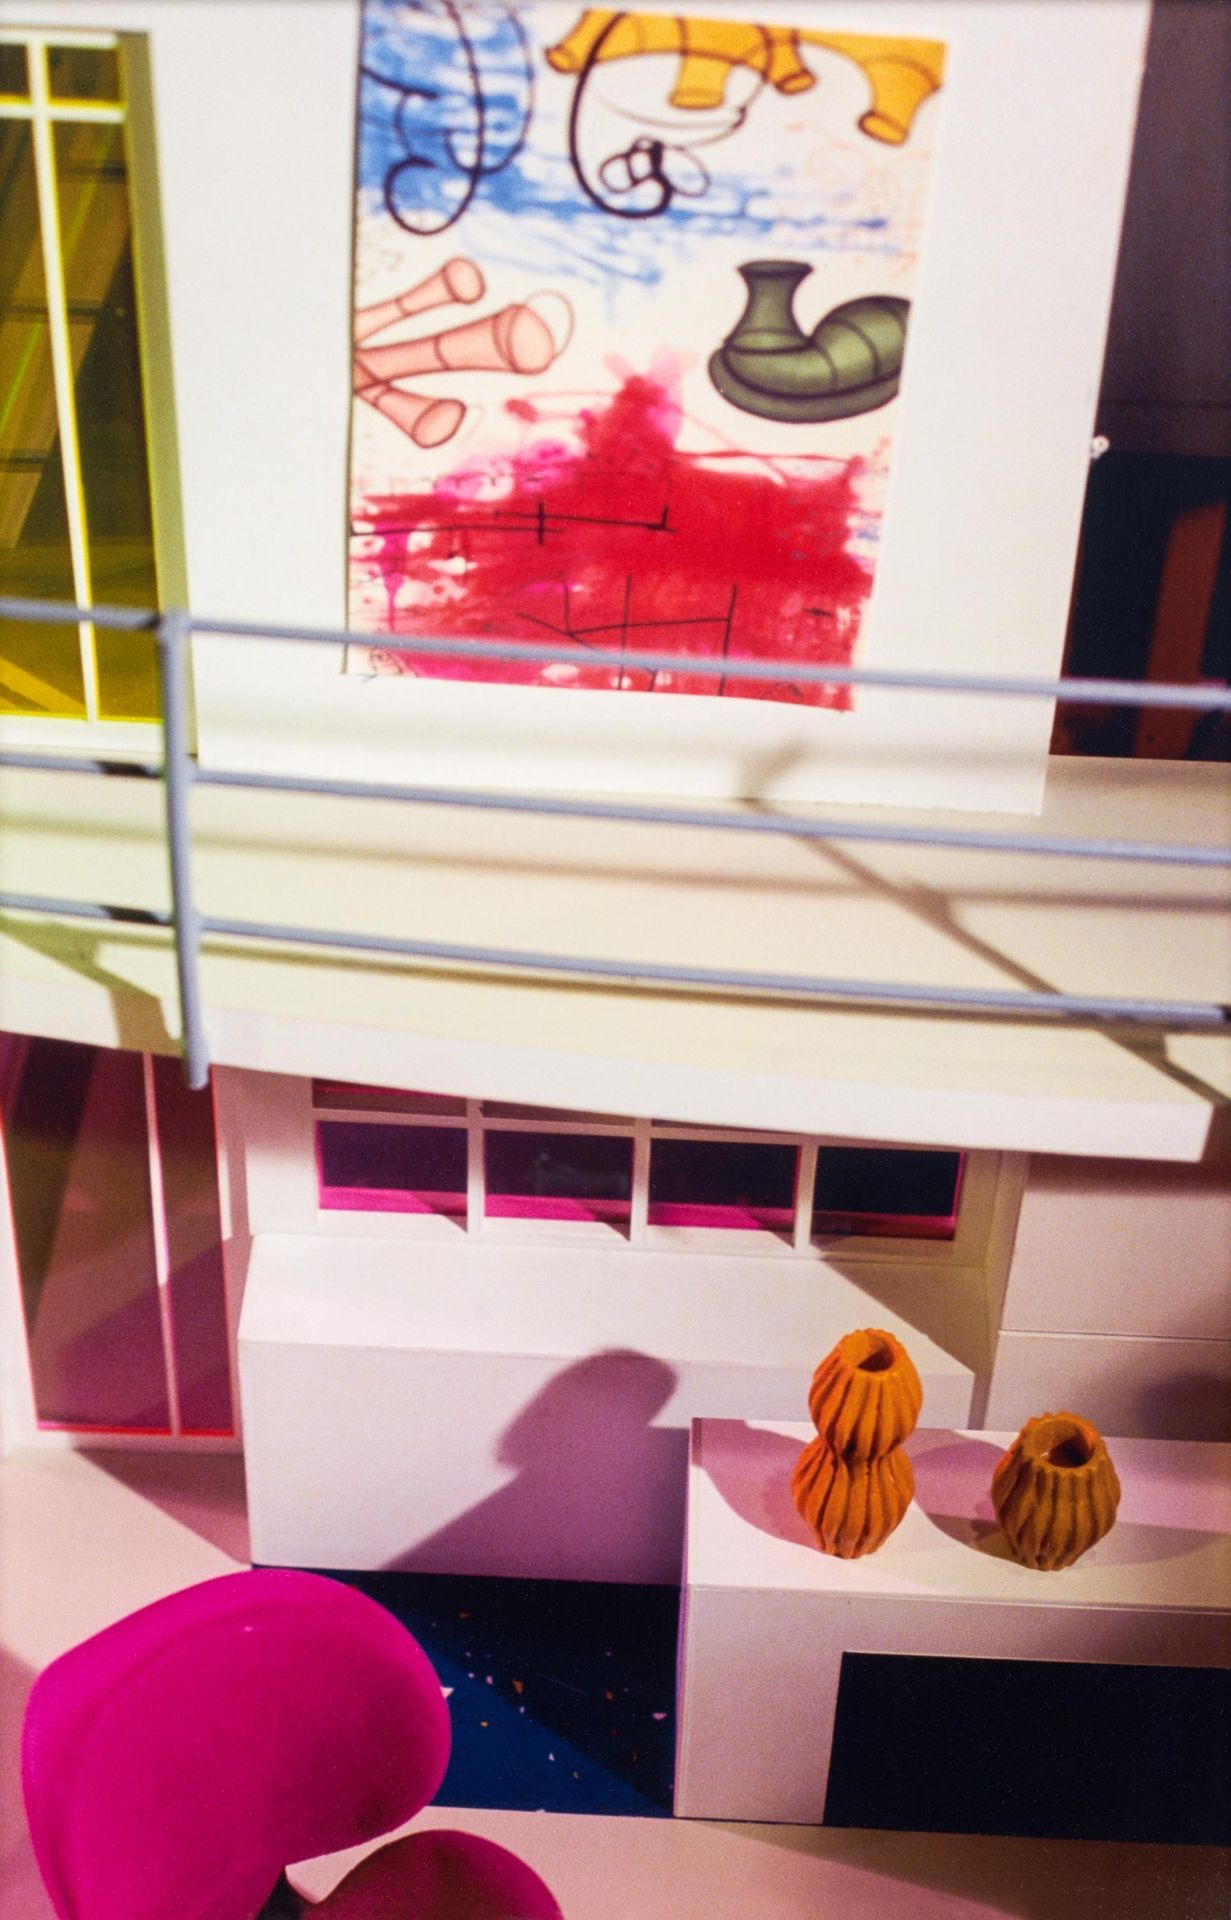 Laurie Simmons SIMMONS, LAURIE
1949 New York

Titre : Kaleidoscope House #2. 
Da&hellip;